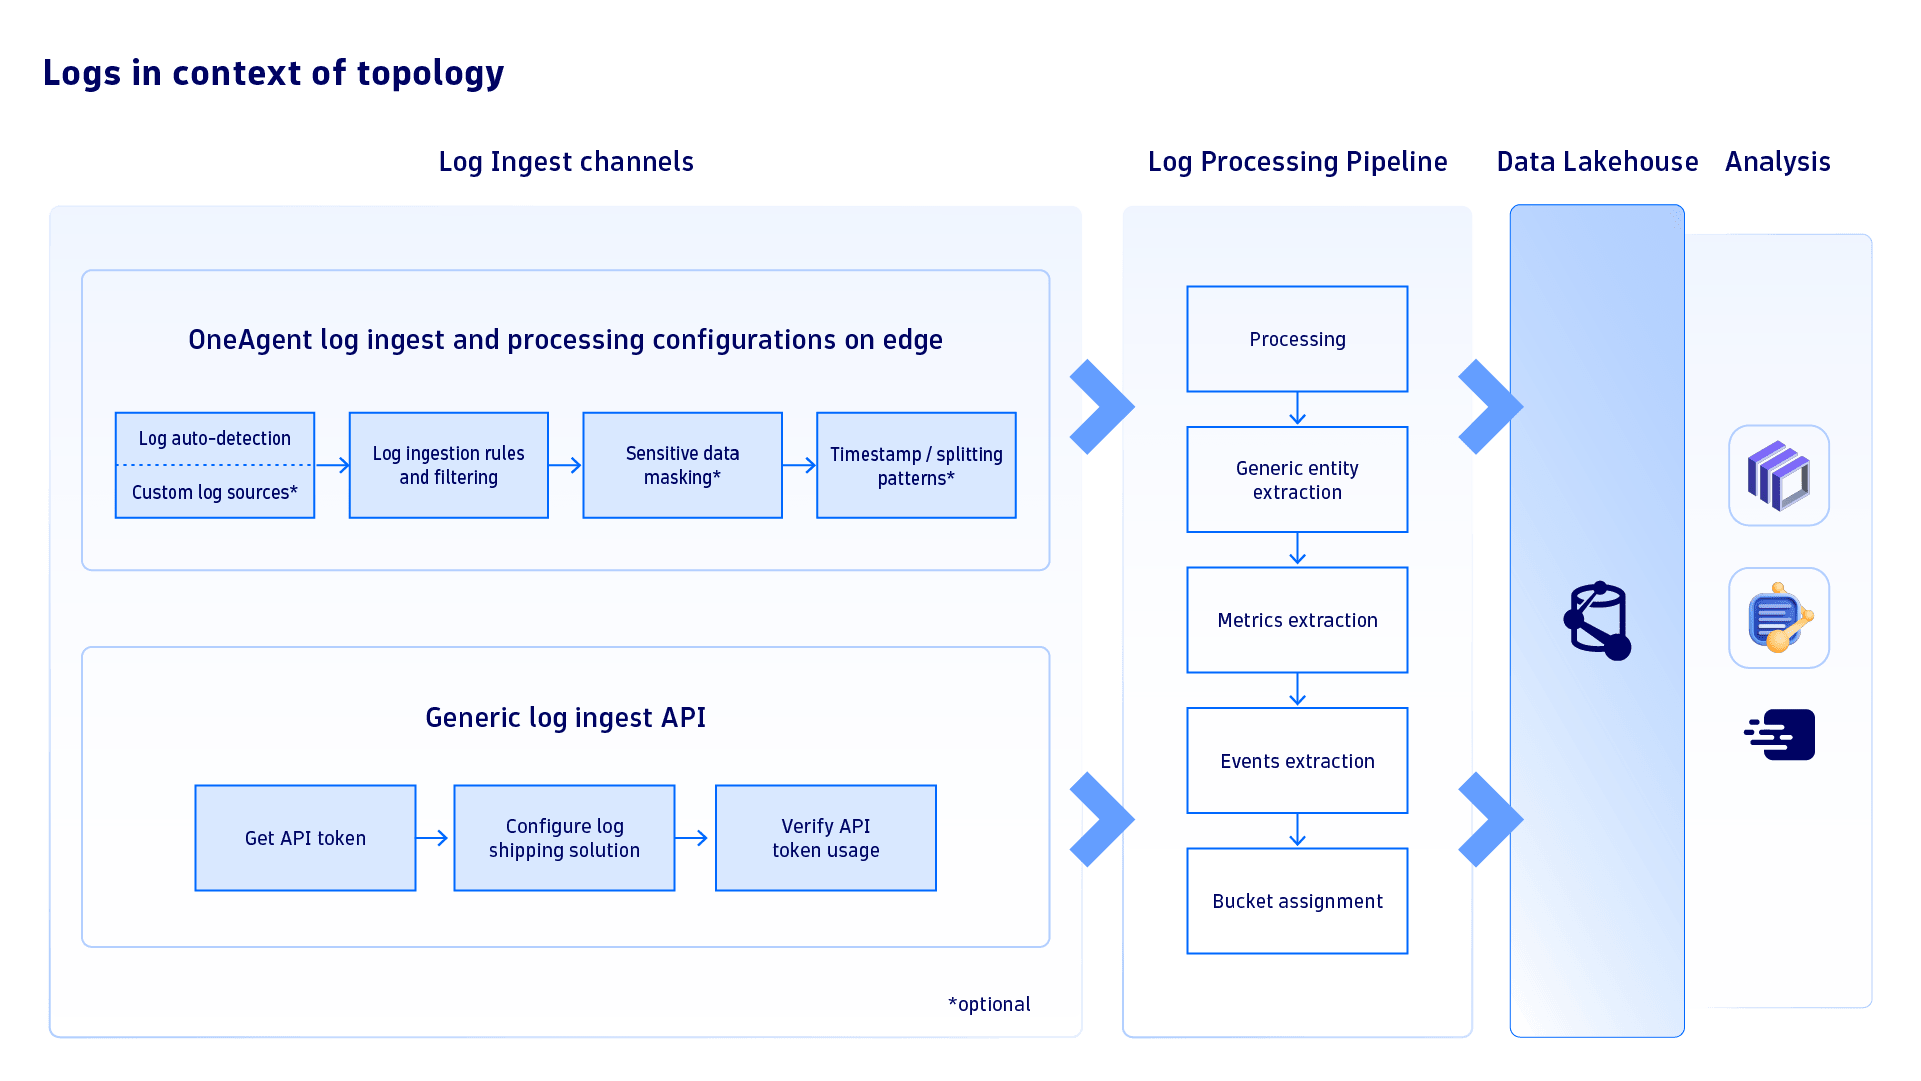 Complete Kubernetes observability with logs in topology context